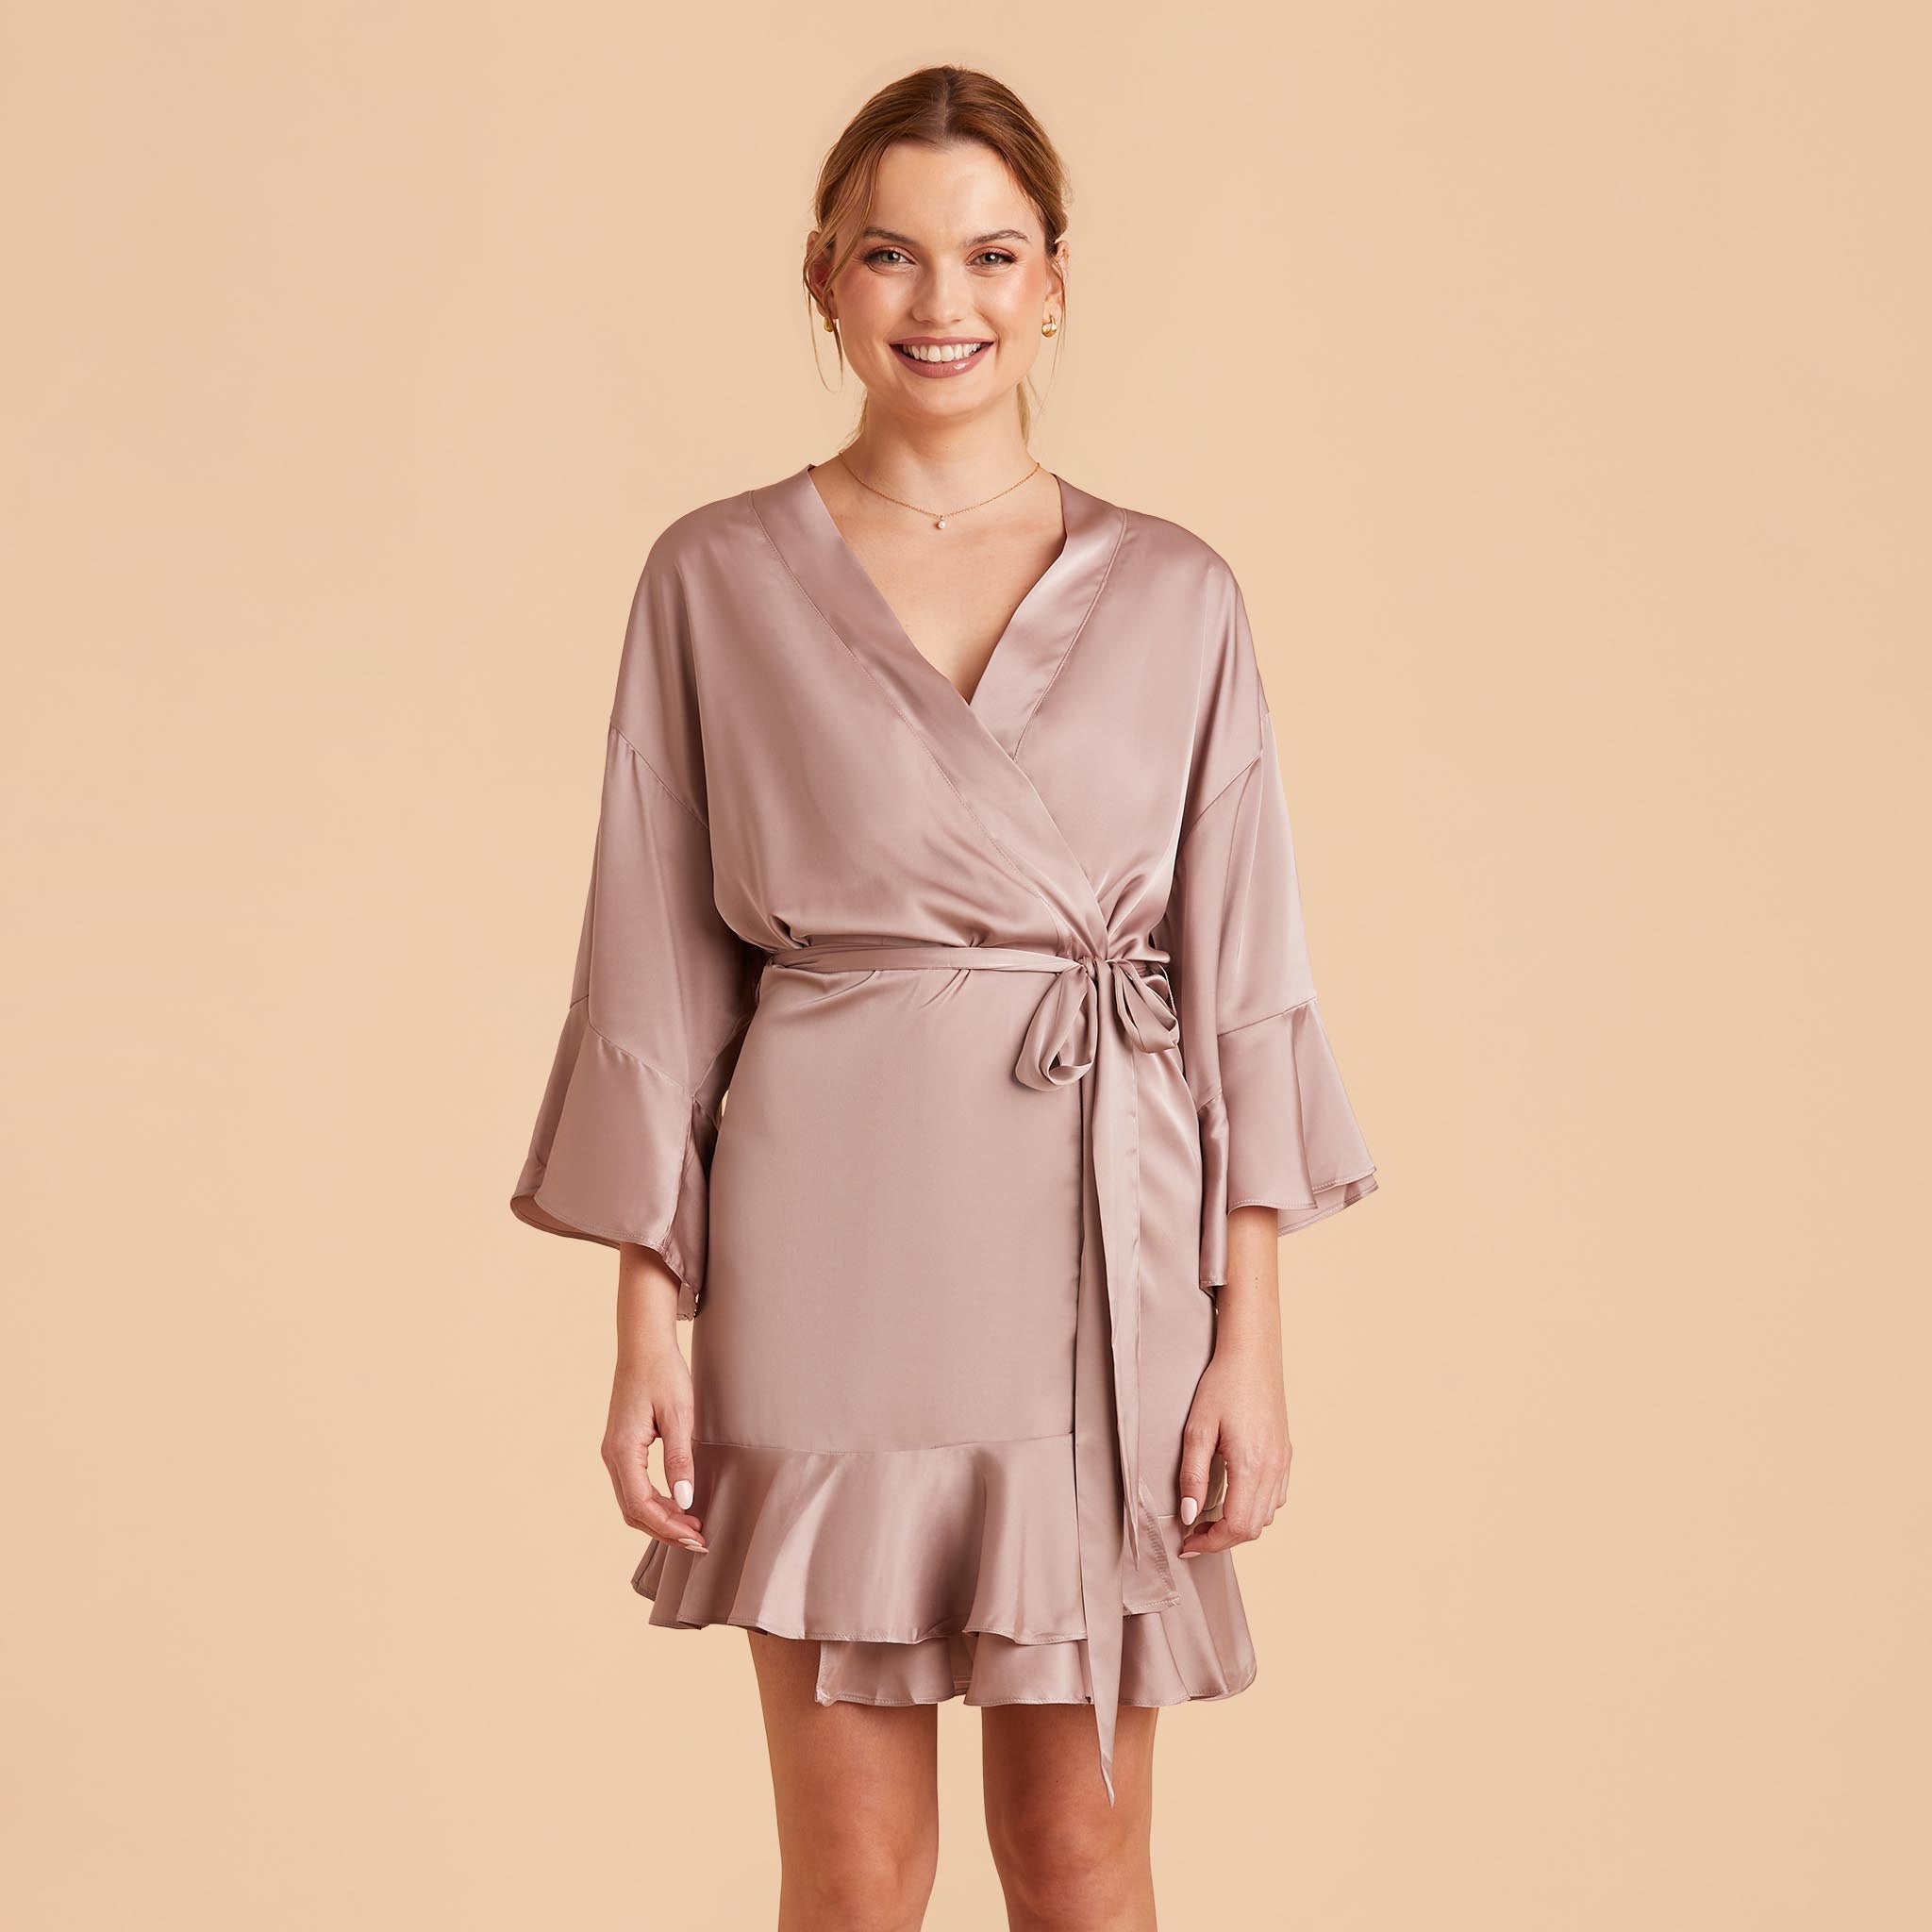 Kenny Ruffle Robe in mauve taupe satin by Birdy Grey, front view